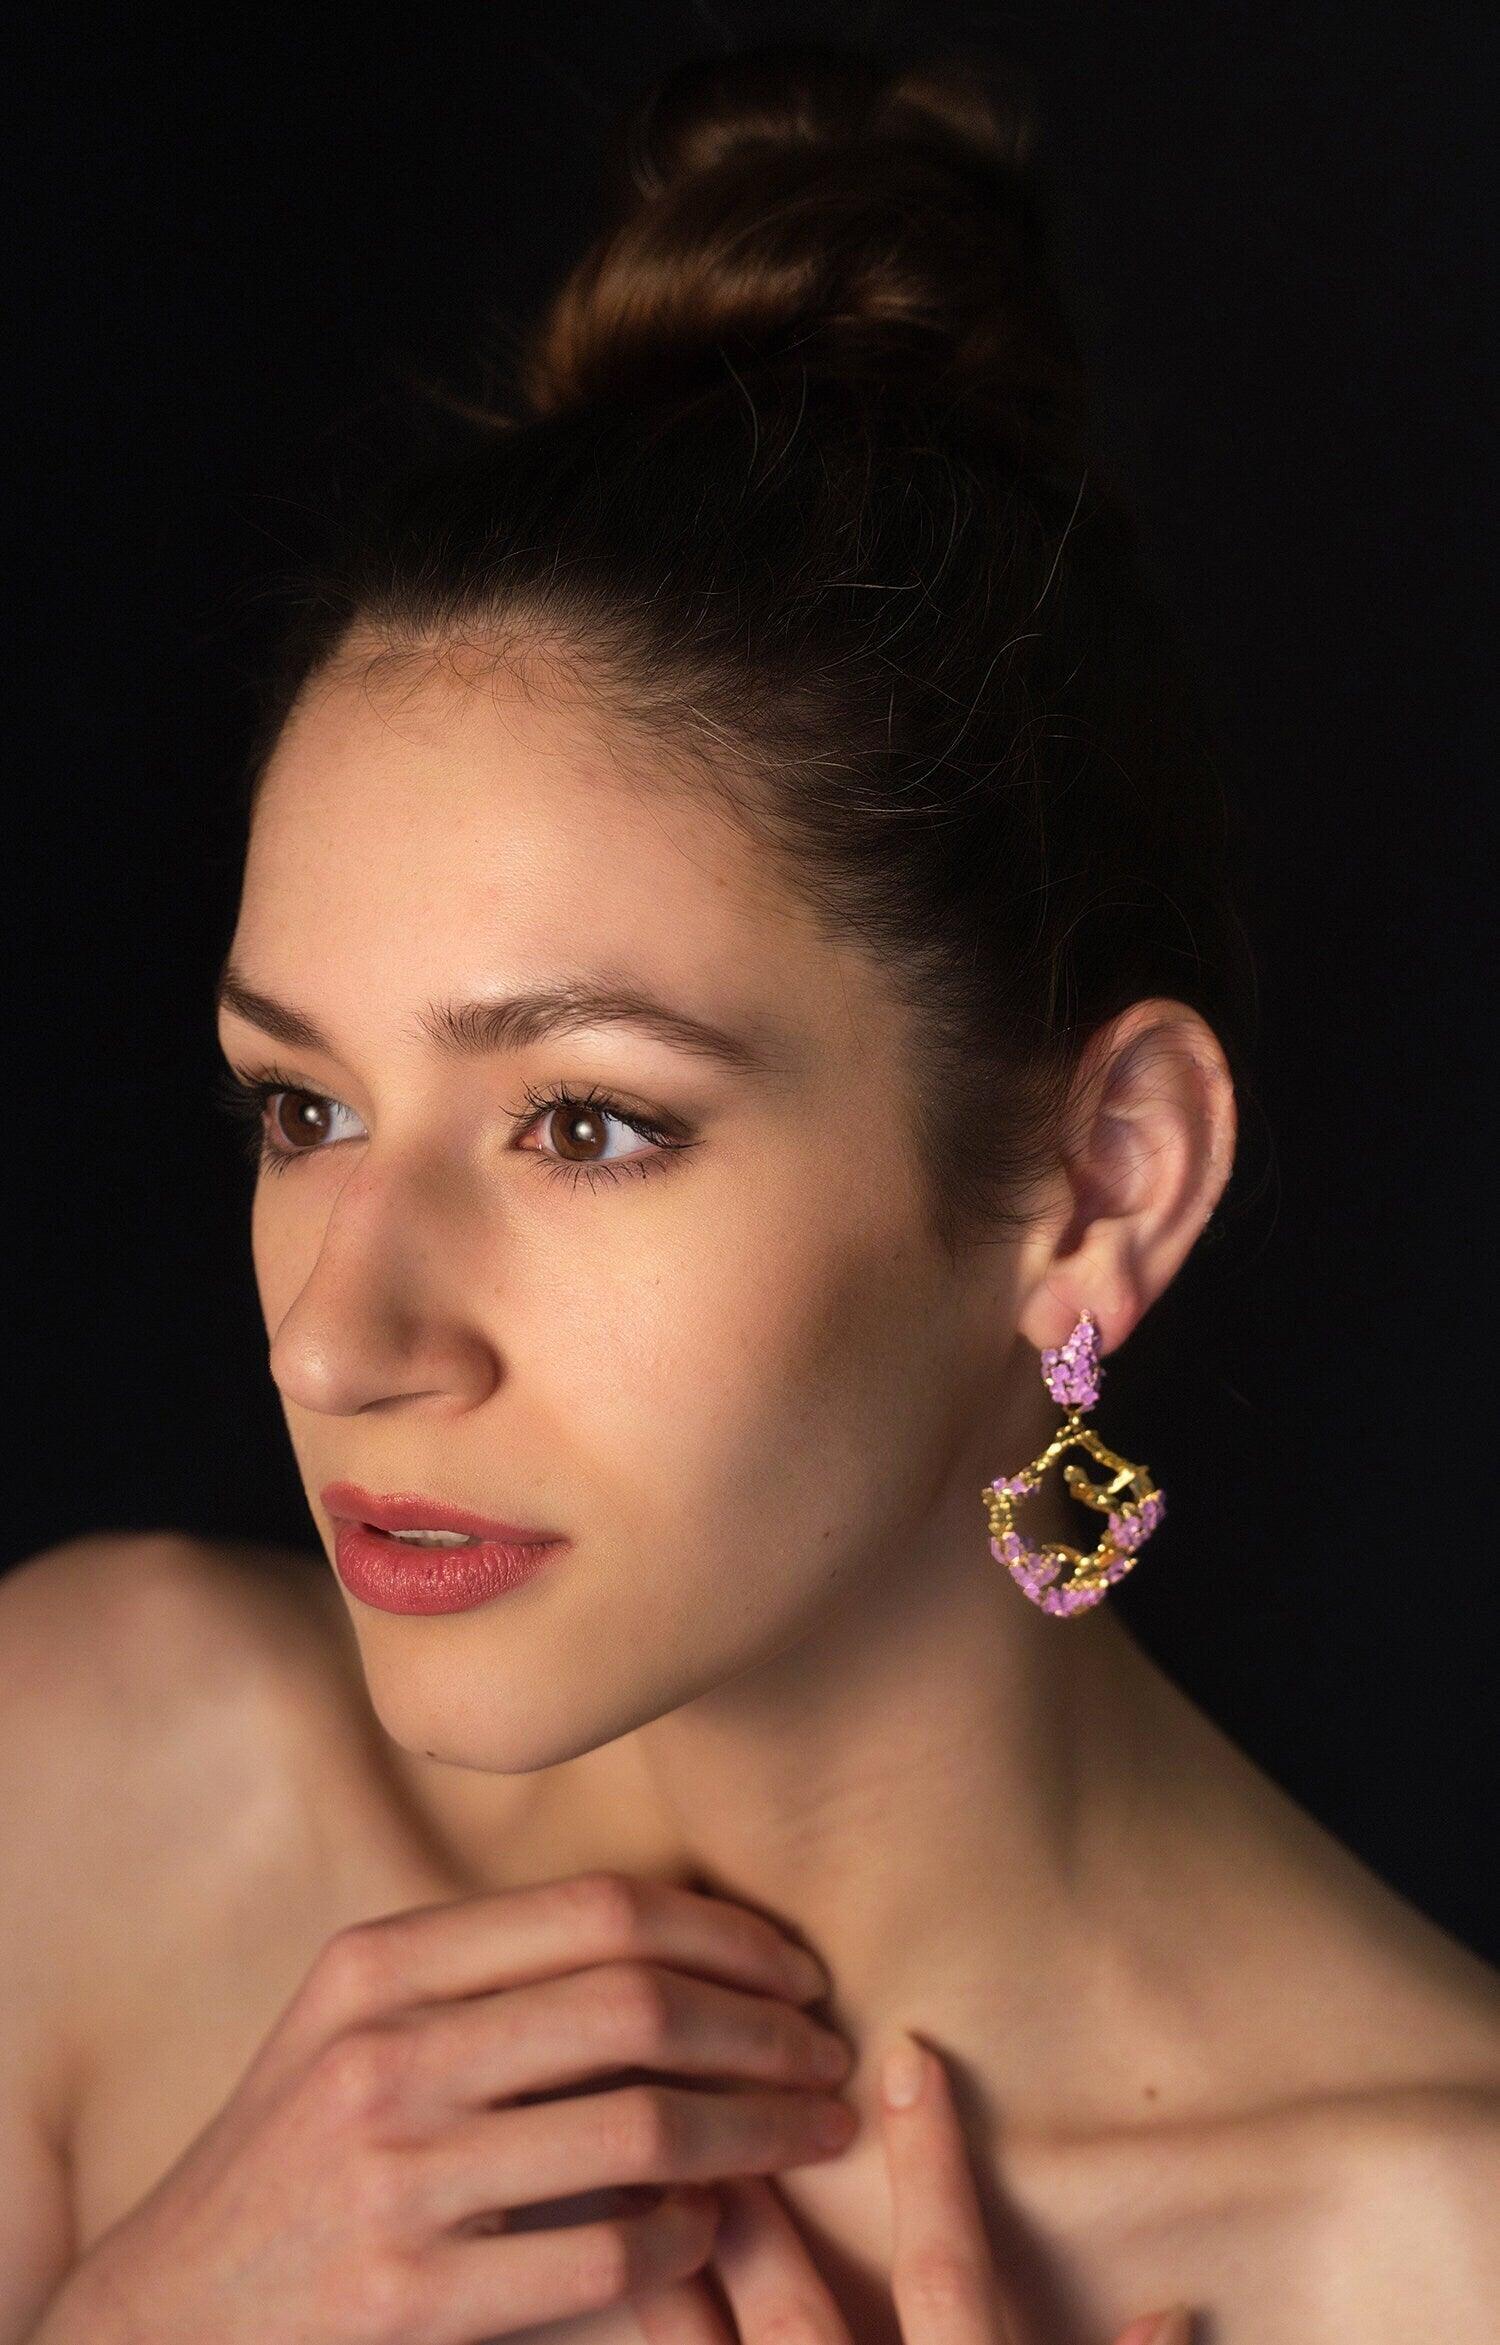 Unique Earrings "Harmony" - Gold & Lavender Gift, Gift For Mom, Artistic, Jewelry